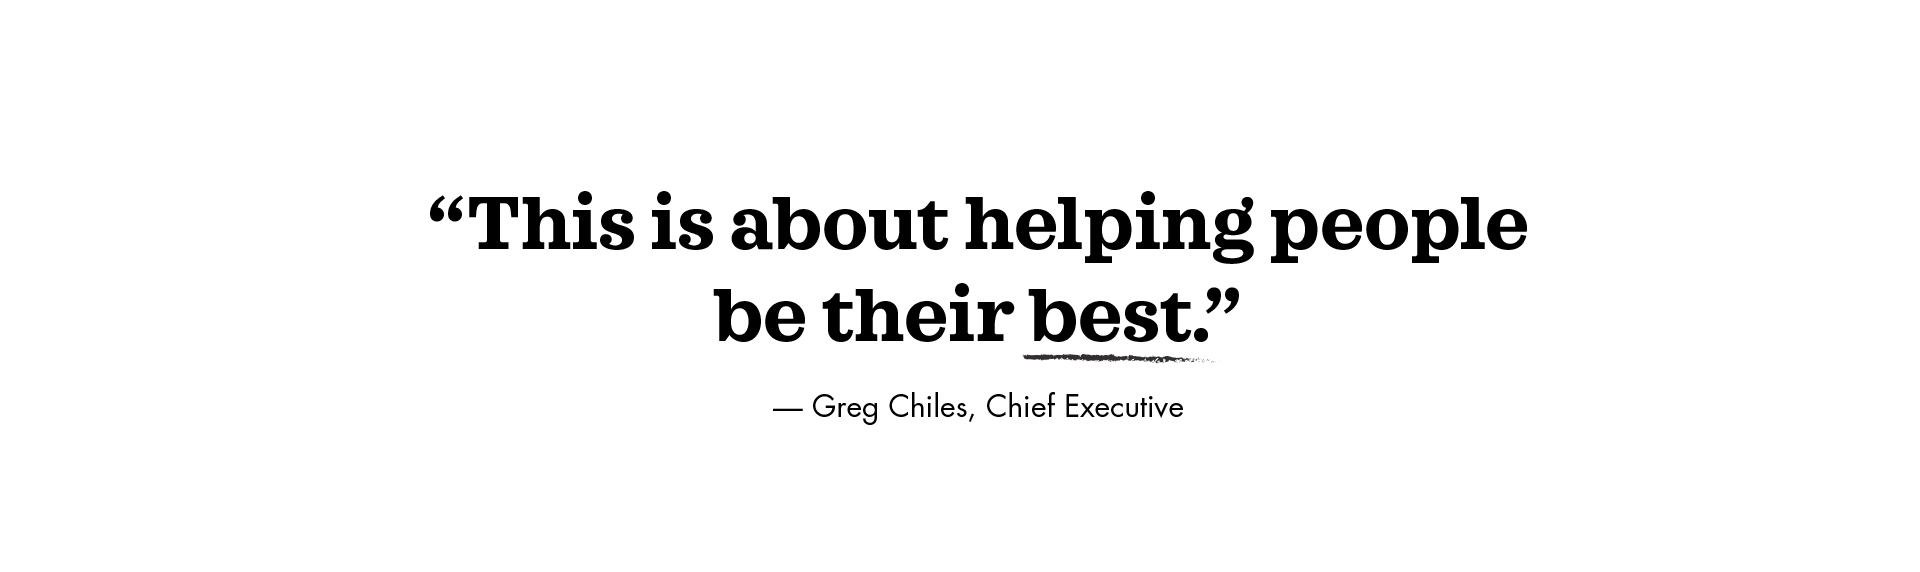 Helping people be their best - Executive Dining